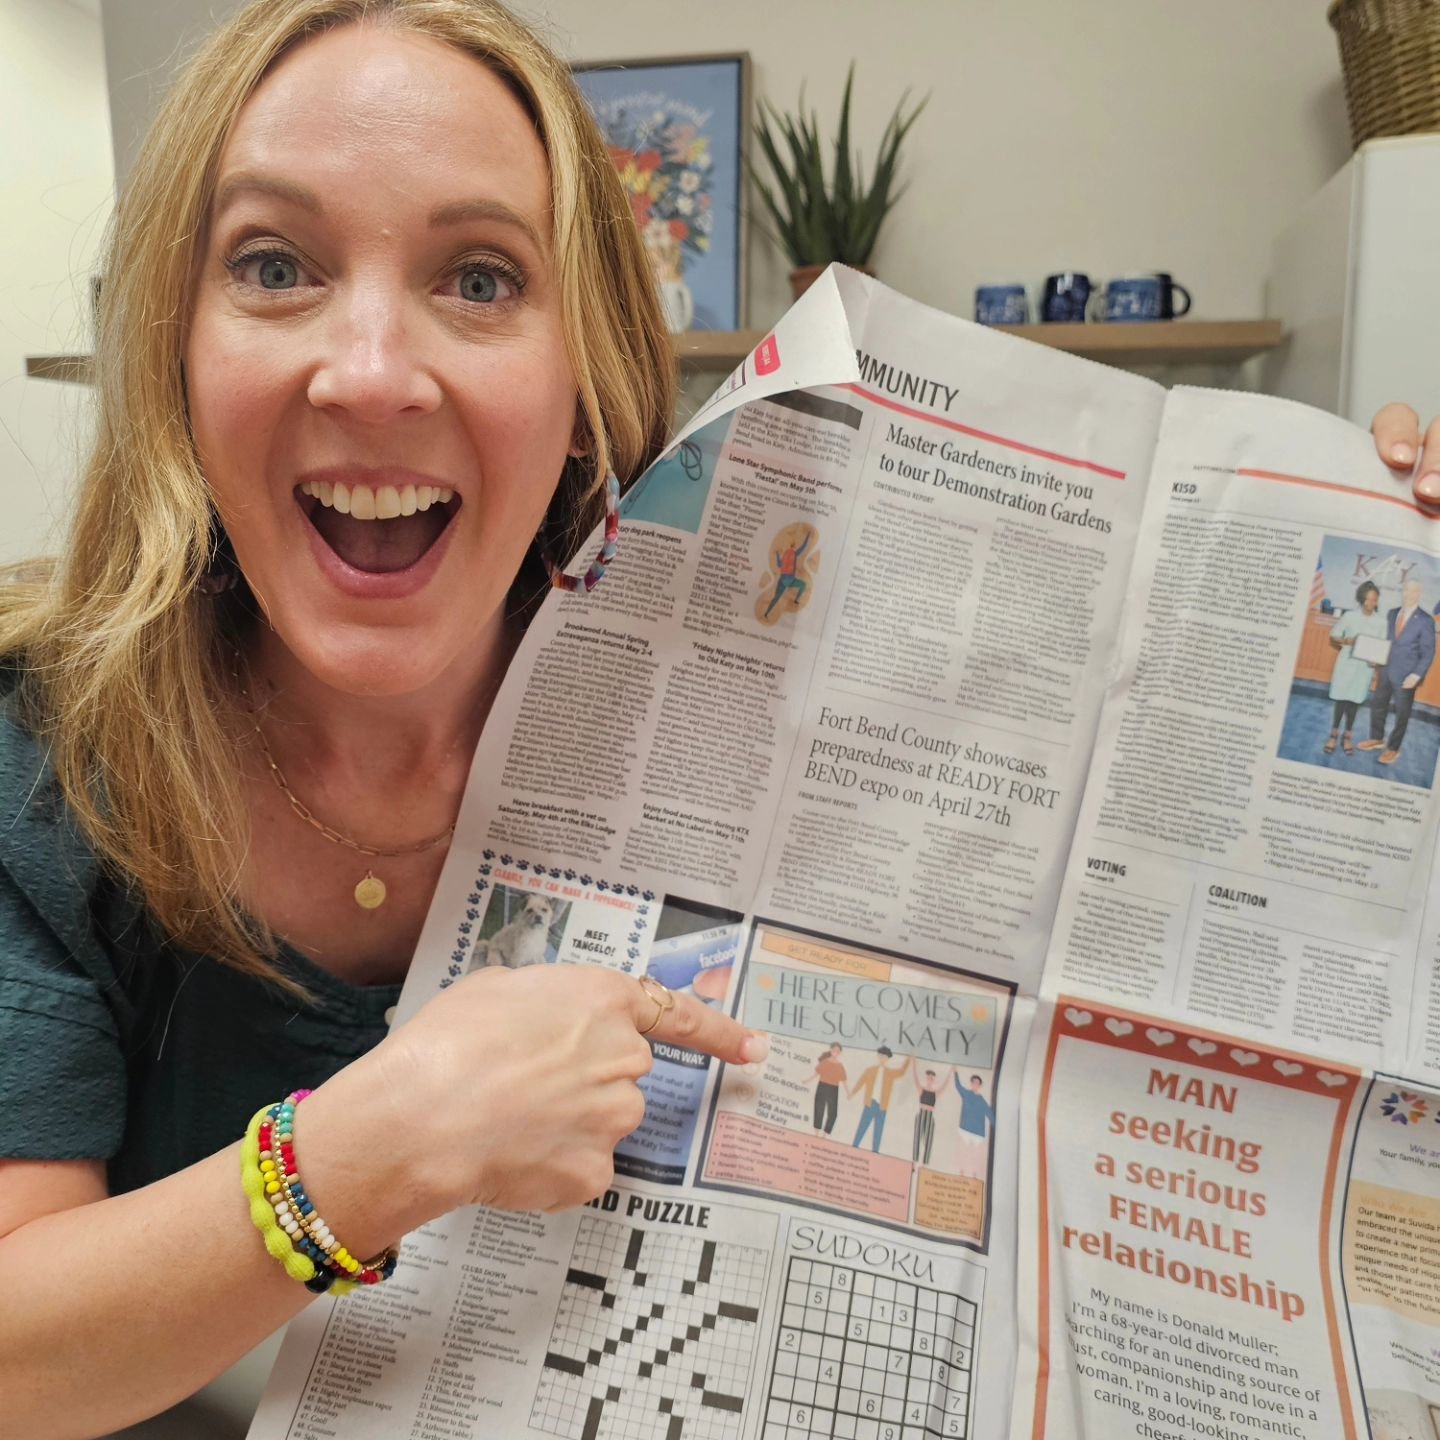 Thank you, @thekatytimes, for advertising about our event Wednesday! 

 Looking forward to celebrating the kickoff to Mental Health Awareness Month with the first annual Here Comes the Sun, Katy Day!

Free workouts,  mental health resources,  photogr